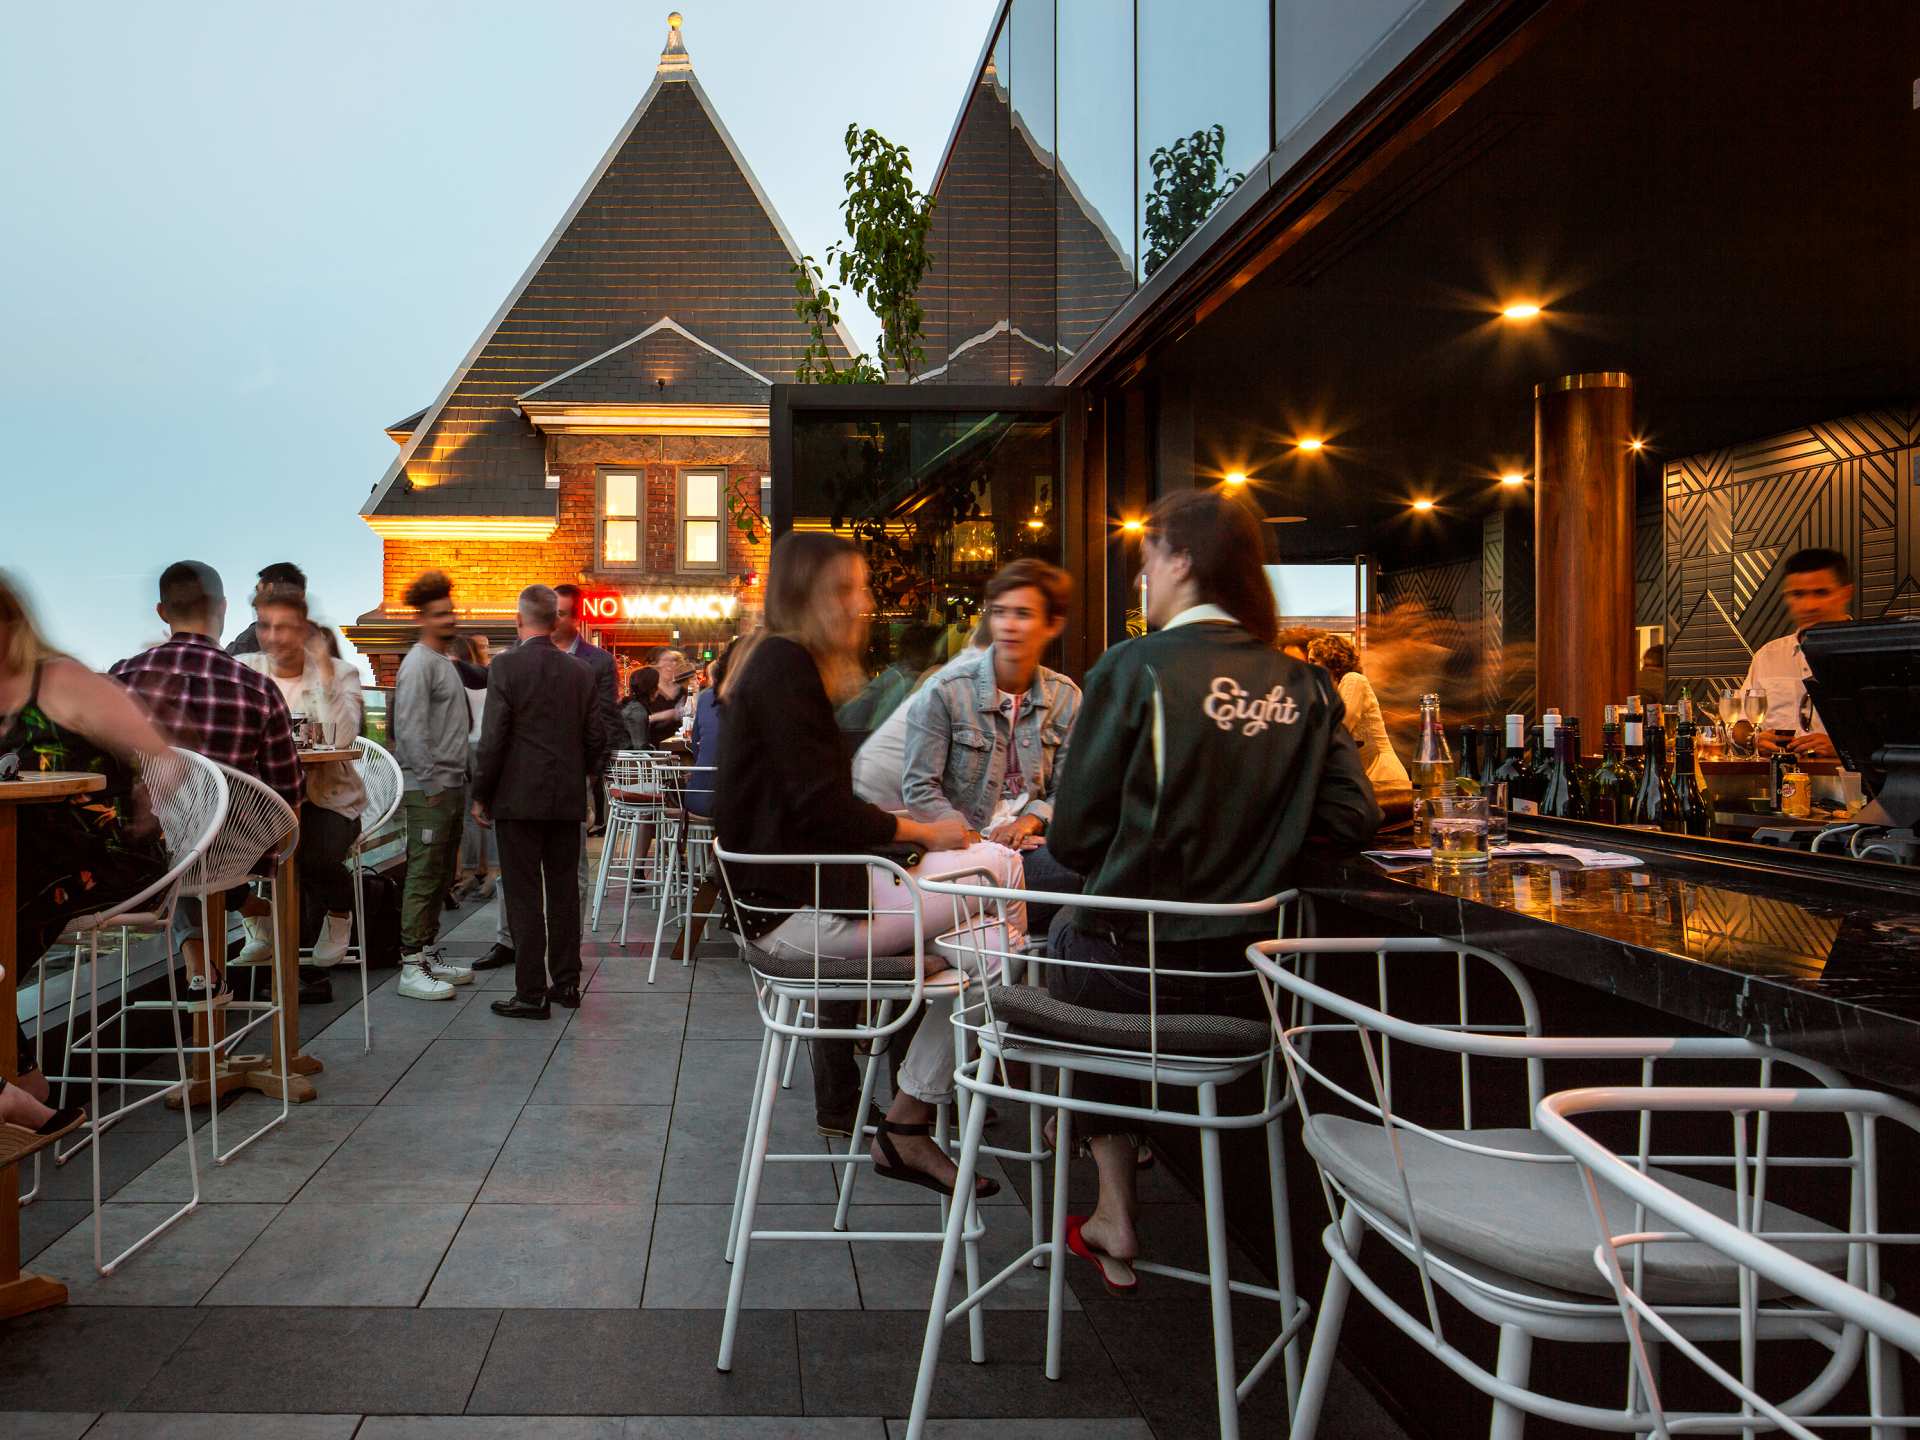 Best patios in Toronto | The crowded Rooftop at The Broadview Hotel at dusk